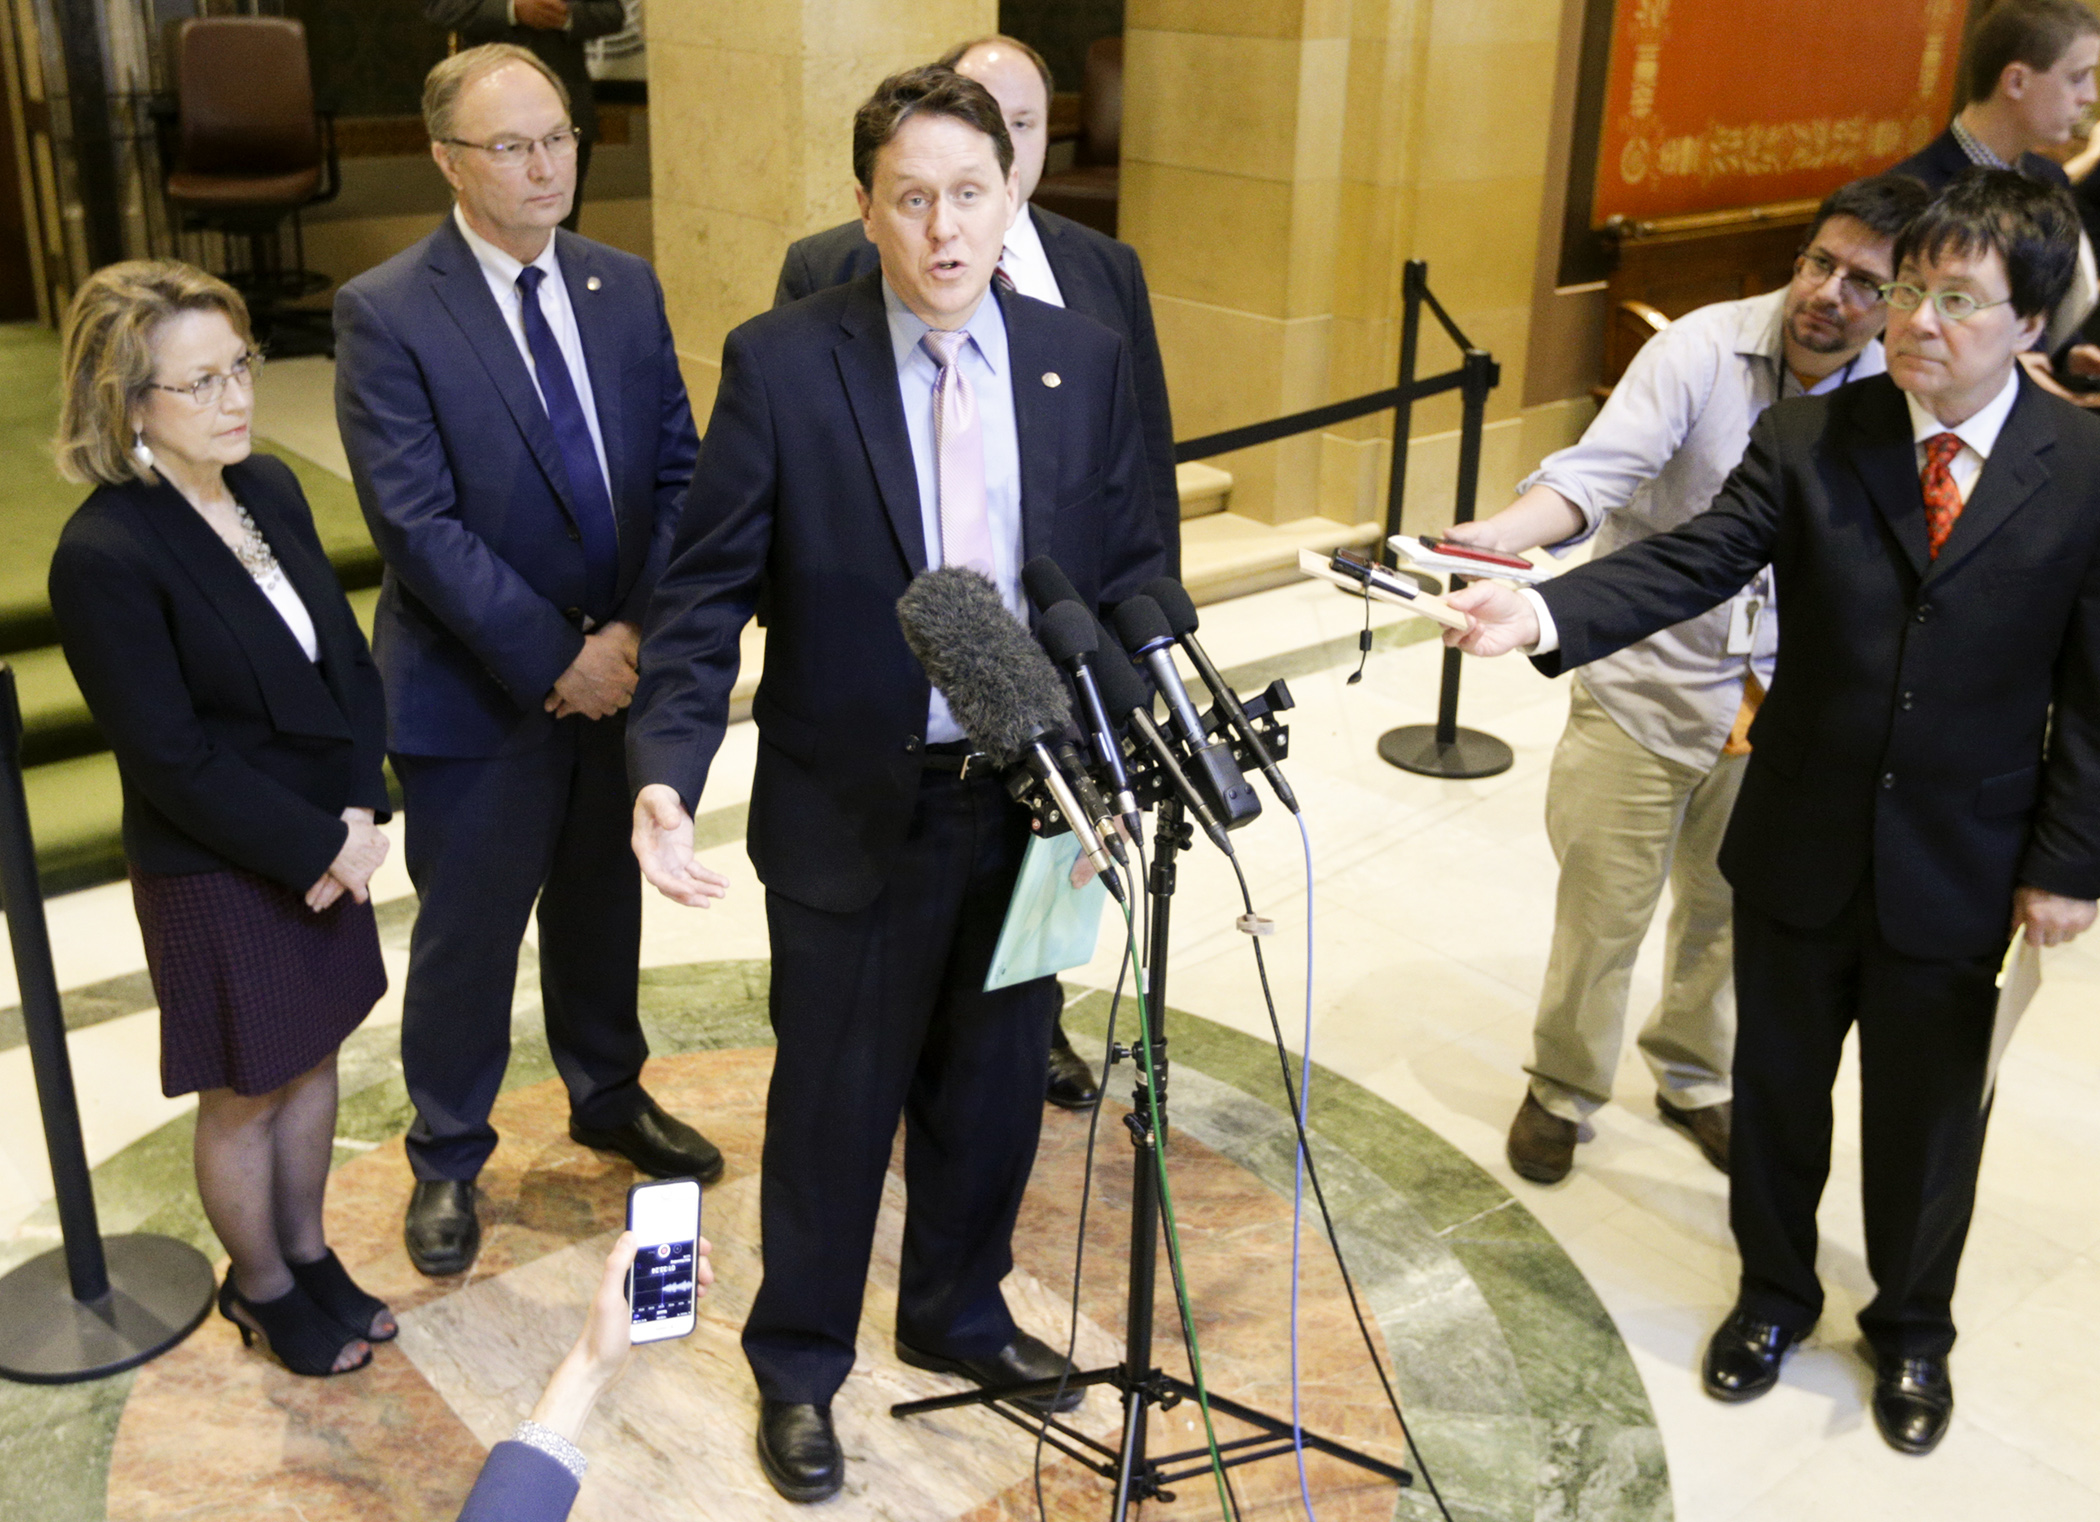 Rep. Matt Dean, center, along with left to right, Reps. Linda Runbeck, Paul Torkelson and Joe Schomacker meet with the press prior to floor debate May 1 on the omnibus health and human services and transportation finance bill. Photo by Paul Battaglia